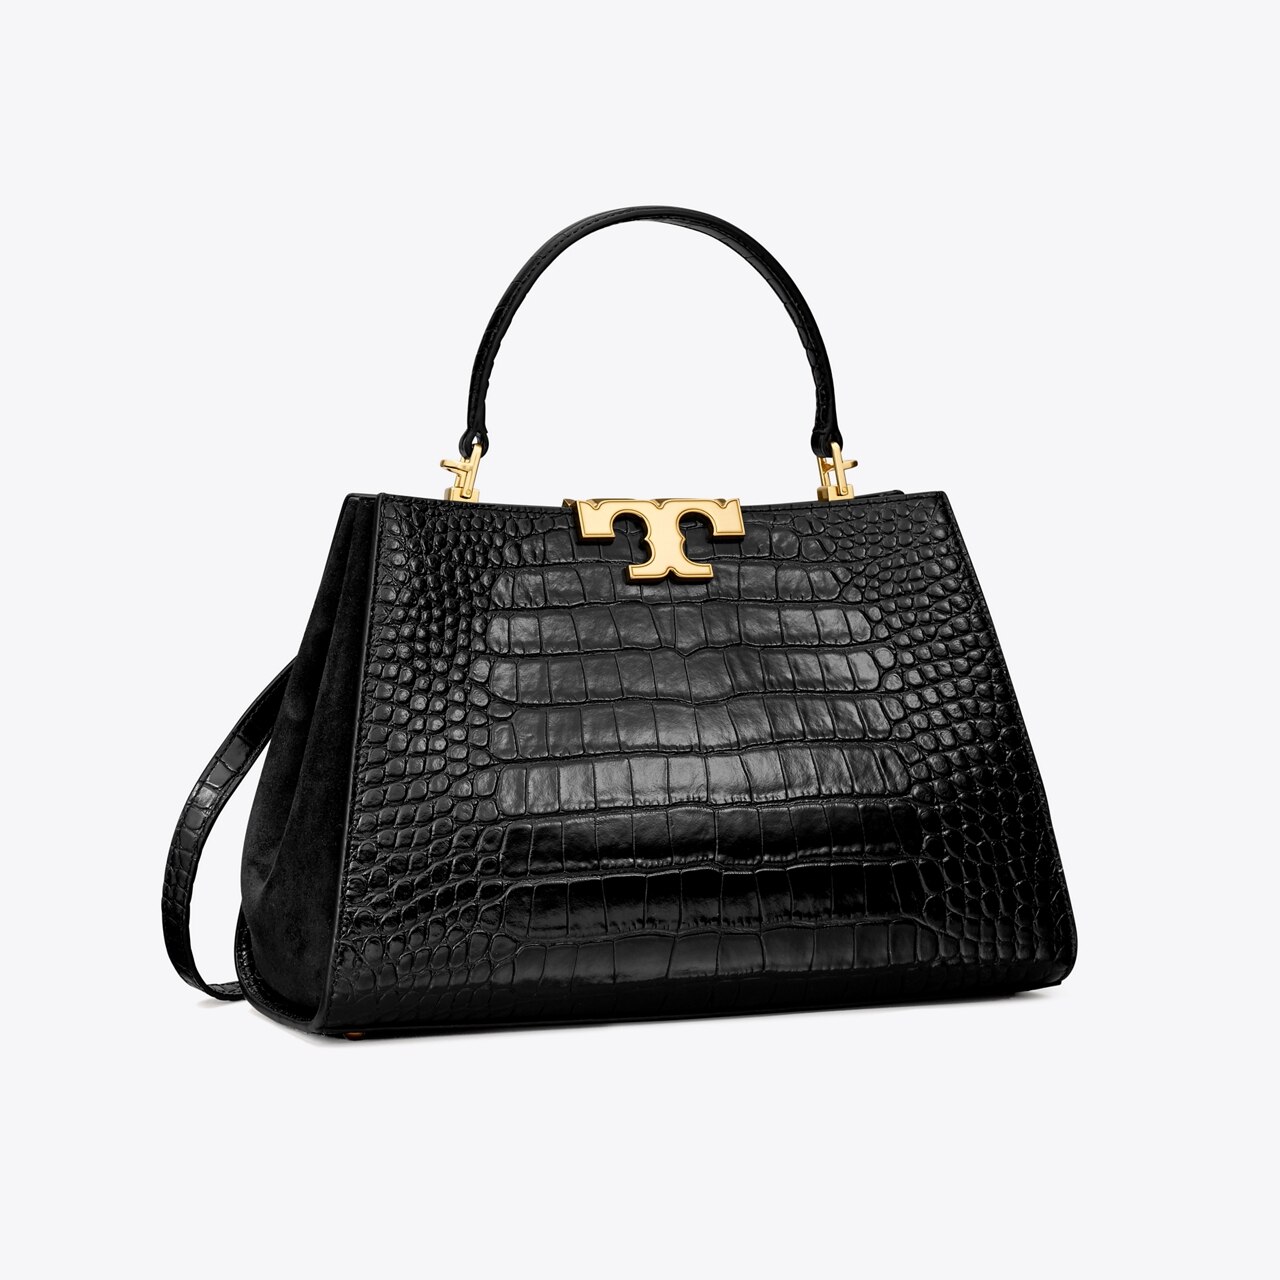 Shop Tory Burch Eleanor Croc-Embossed Leather Convertible Shoulder